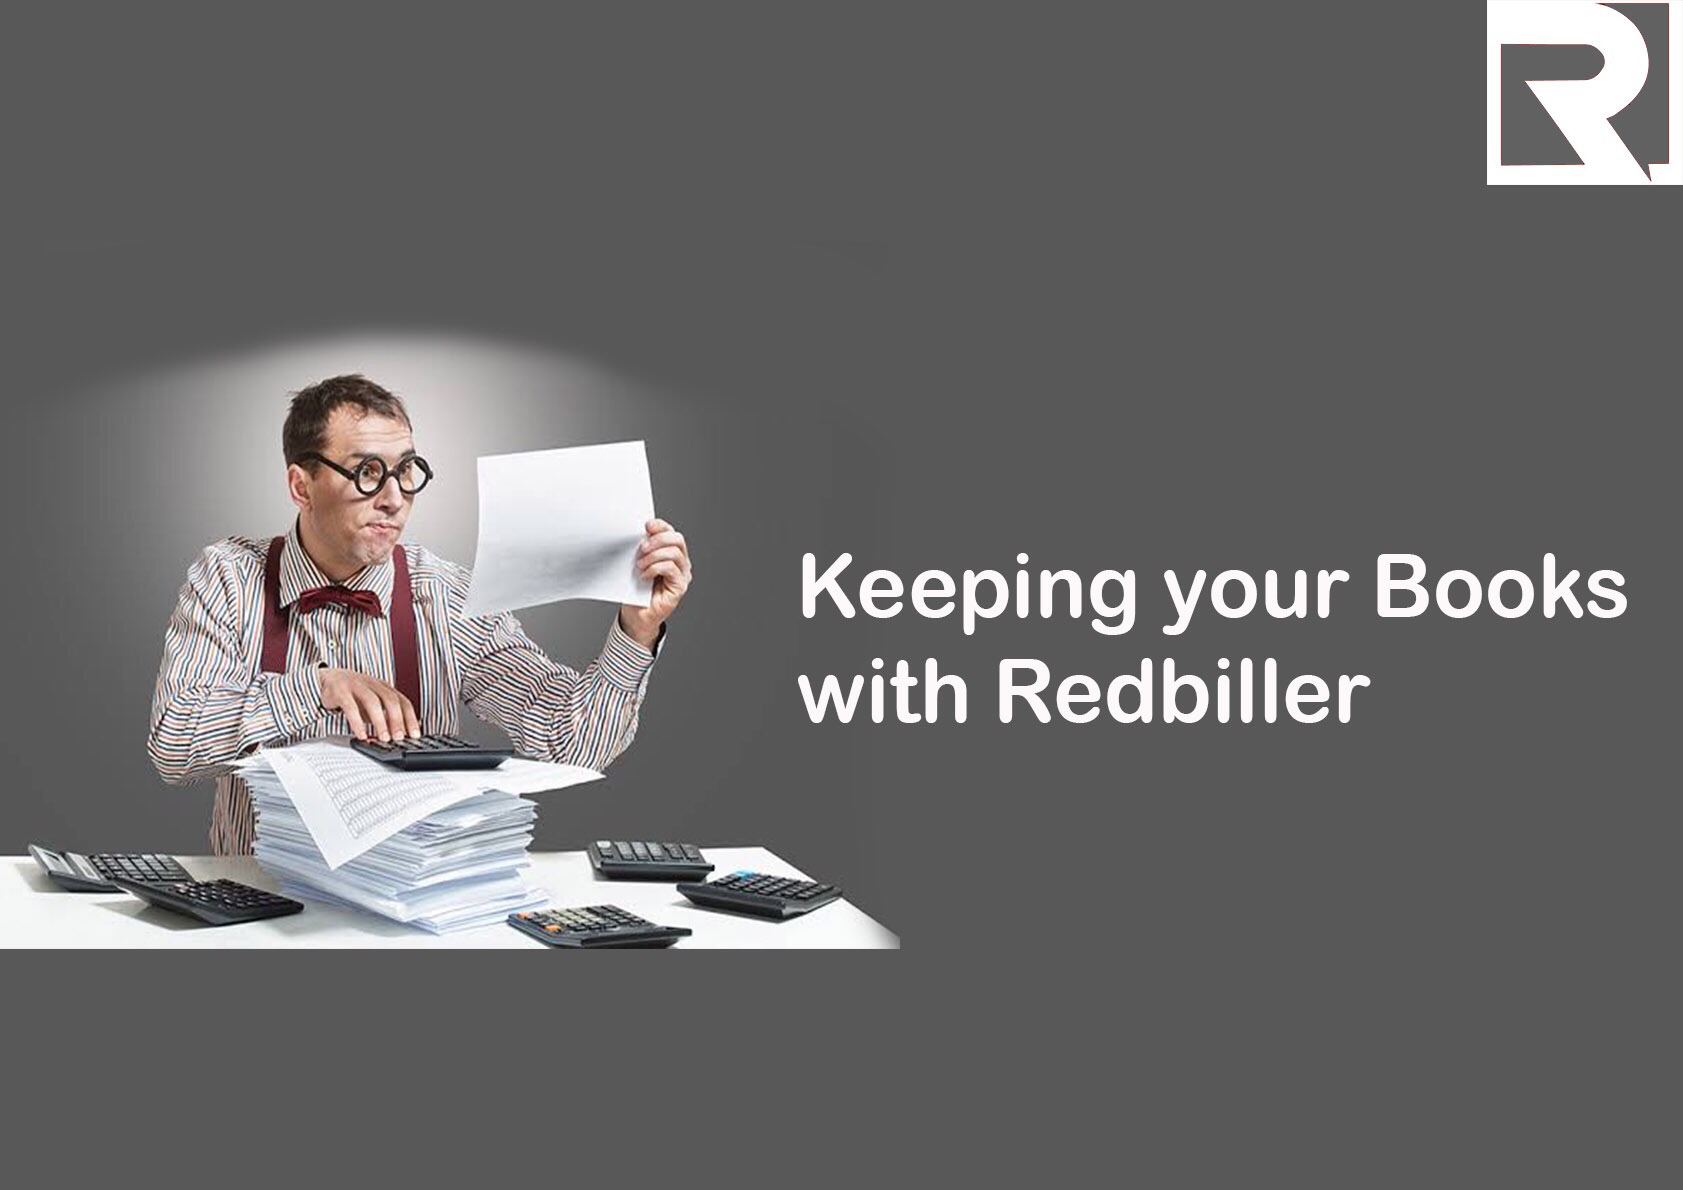 Keeping your Books with Redbiller